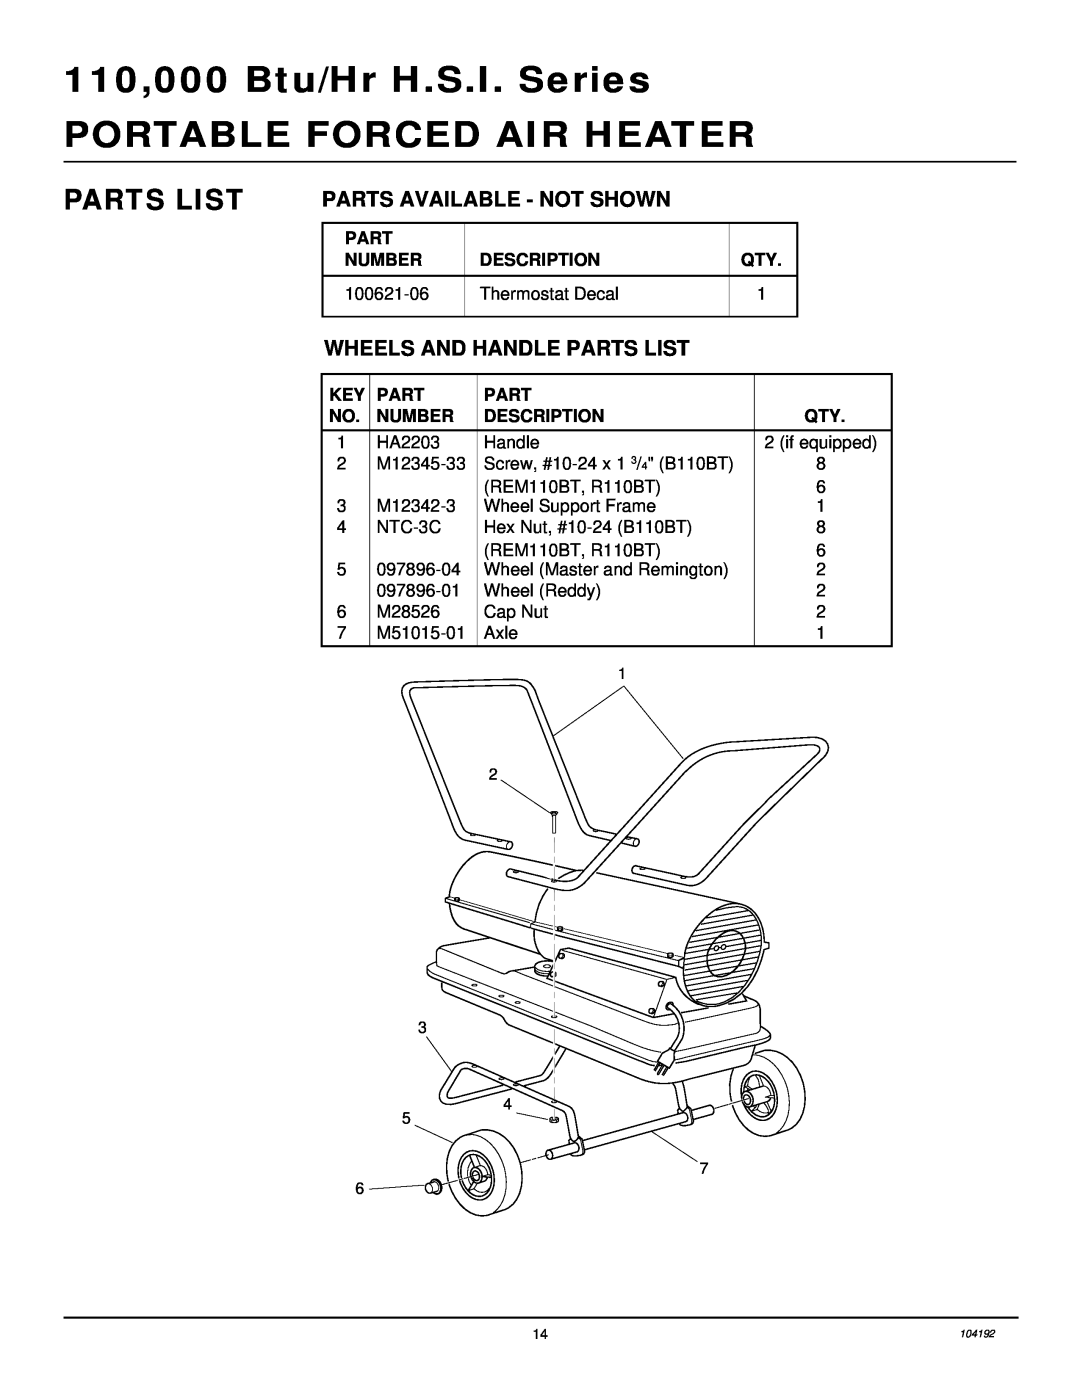 Desa B110BT Parts Available - Not Shown, Wheels And Handle Parts List, Number, Description, 100621-06, Thermostat Decal 